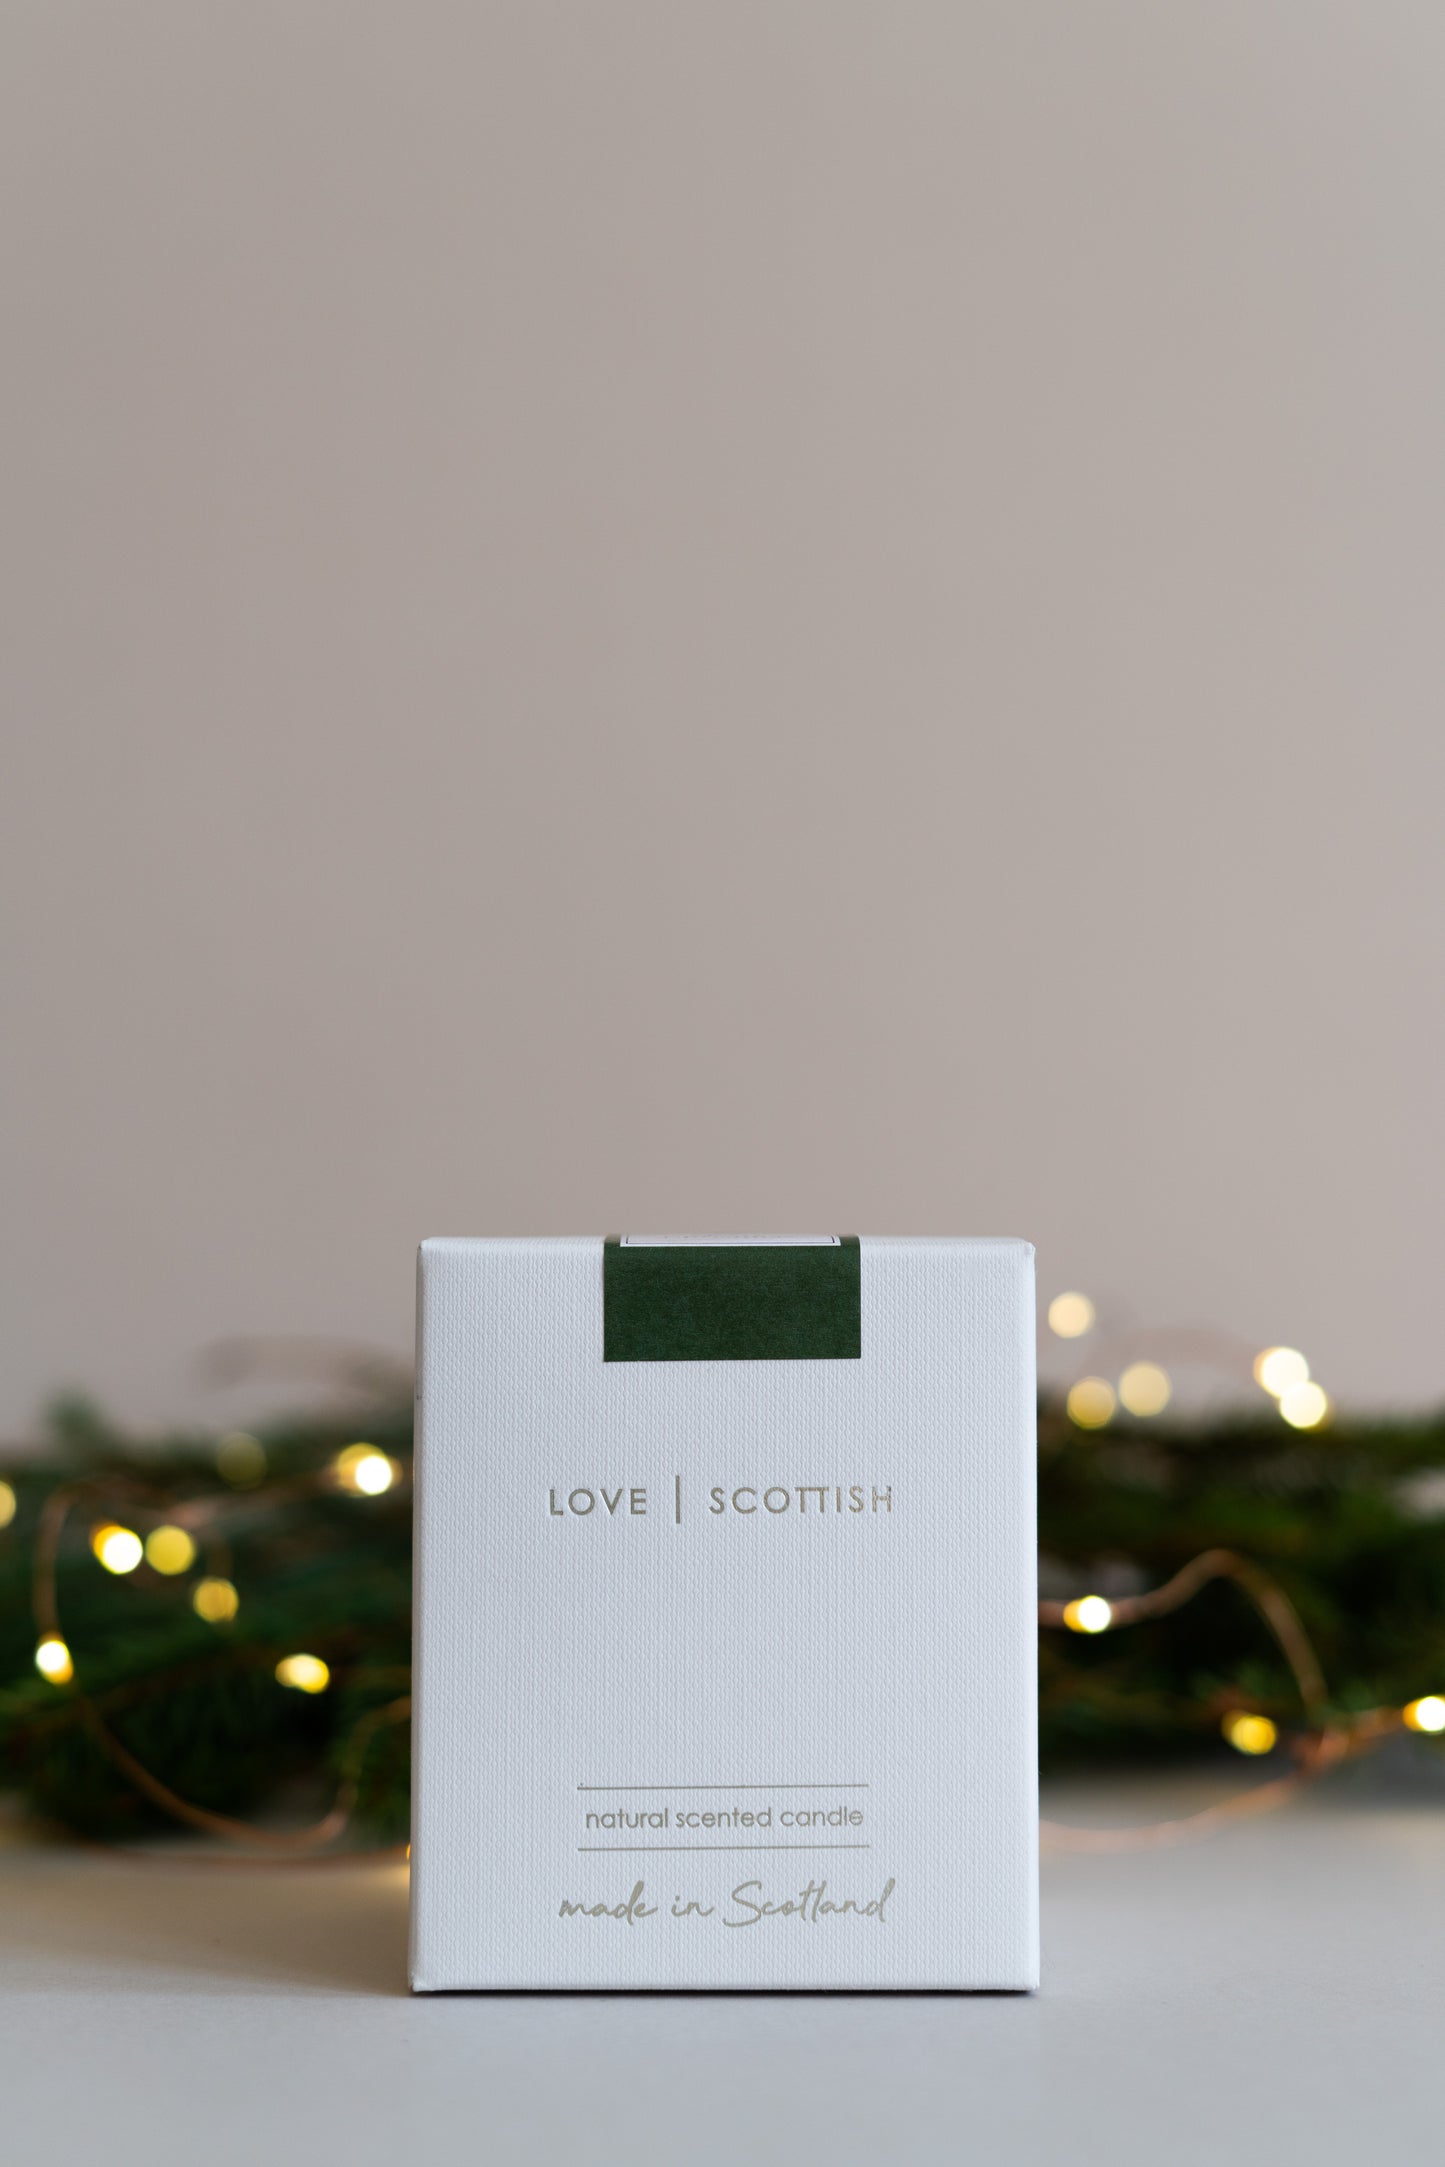 Love Scottish Merry Christmas Wax Candle. Made in Scotland.